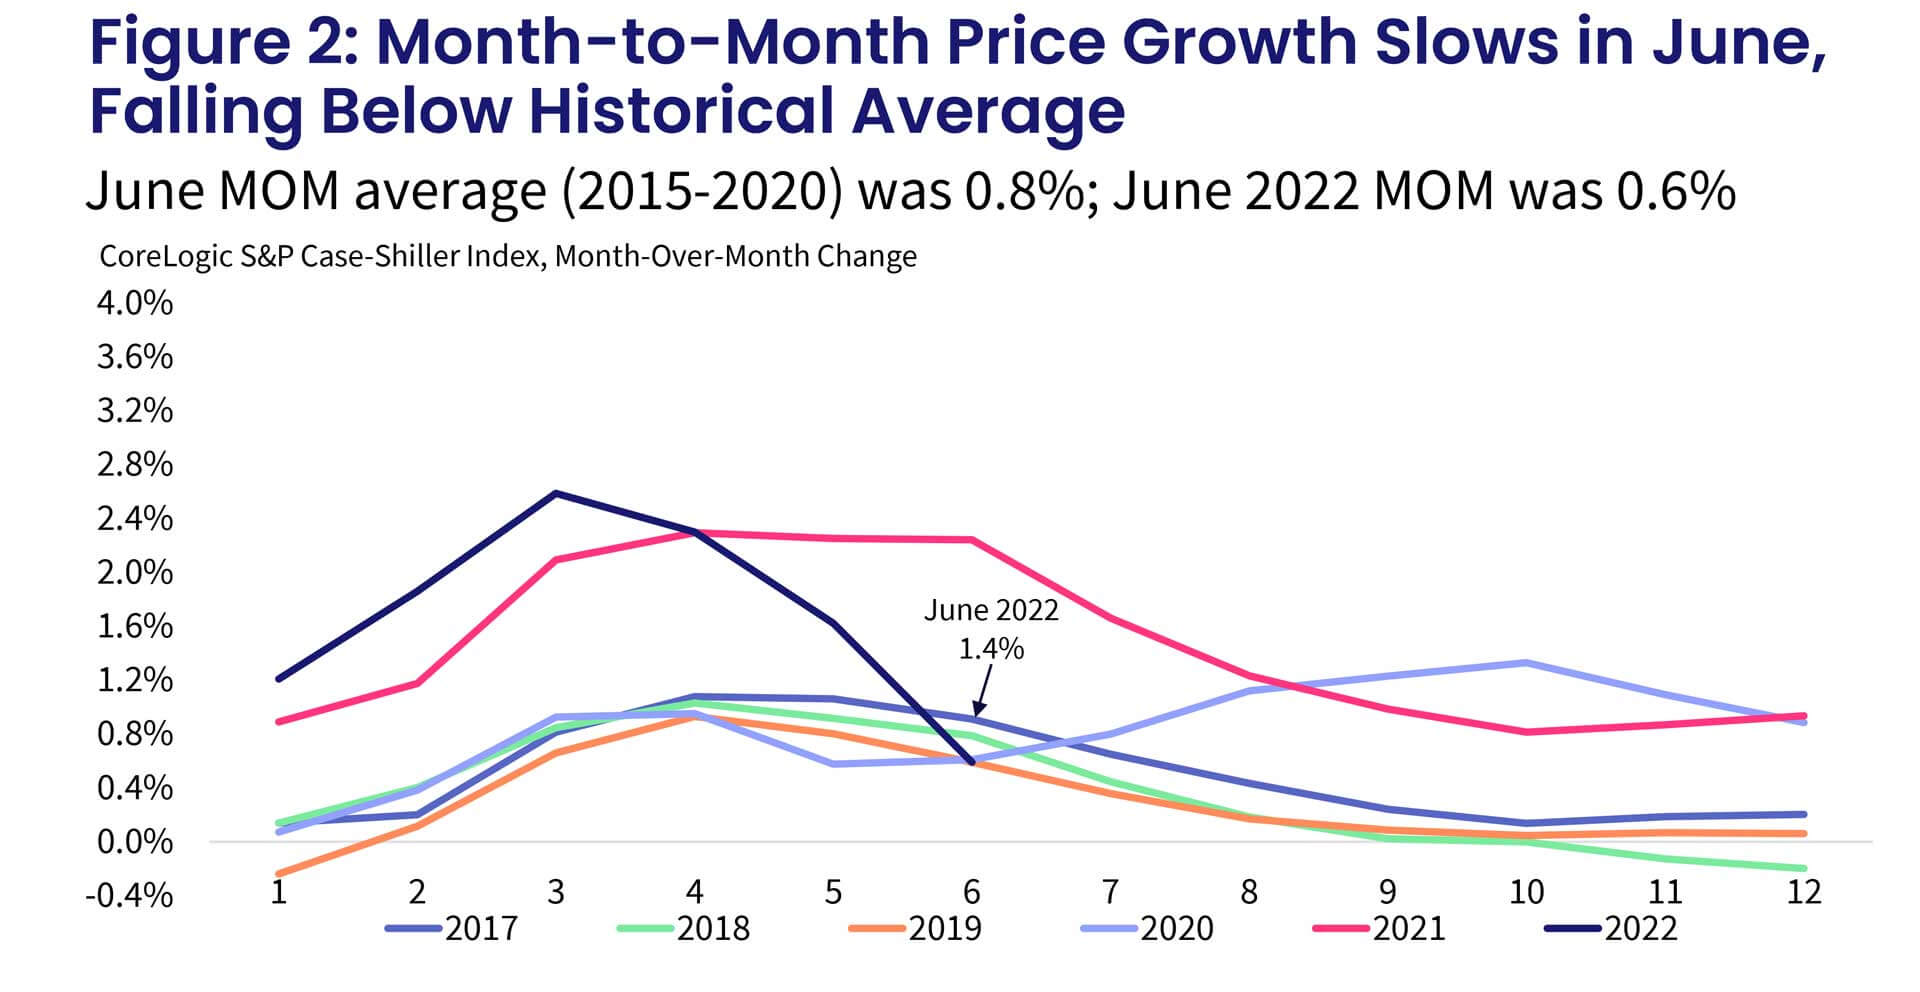 Figure 2: Month-to-Month Price Growth Slows in June, Falling Below Historical Average